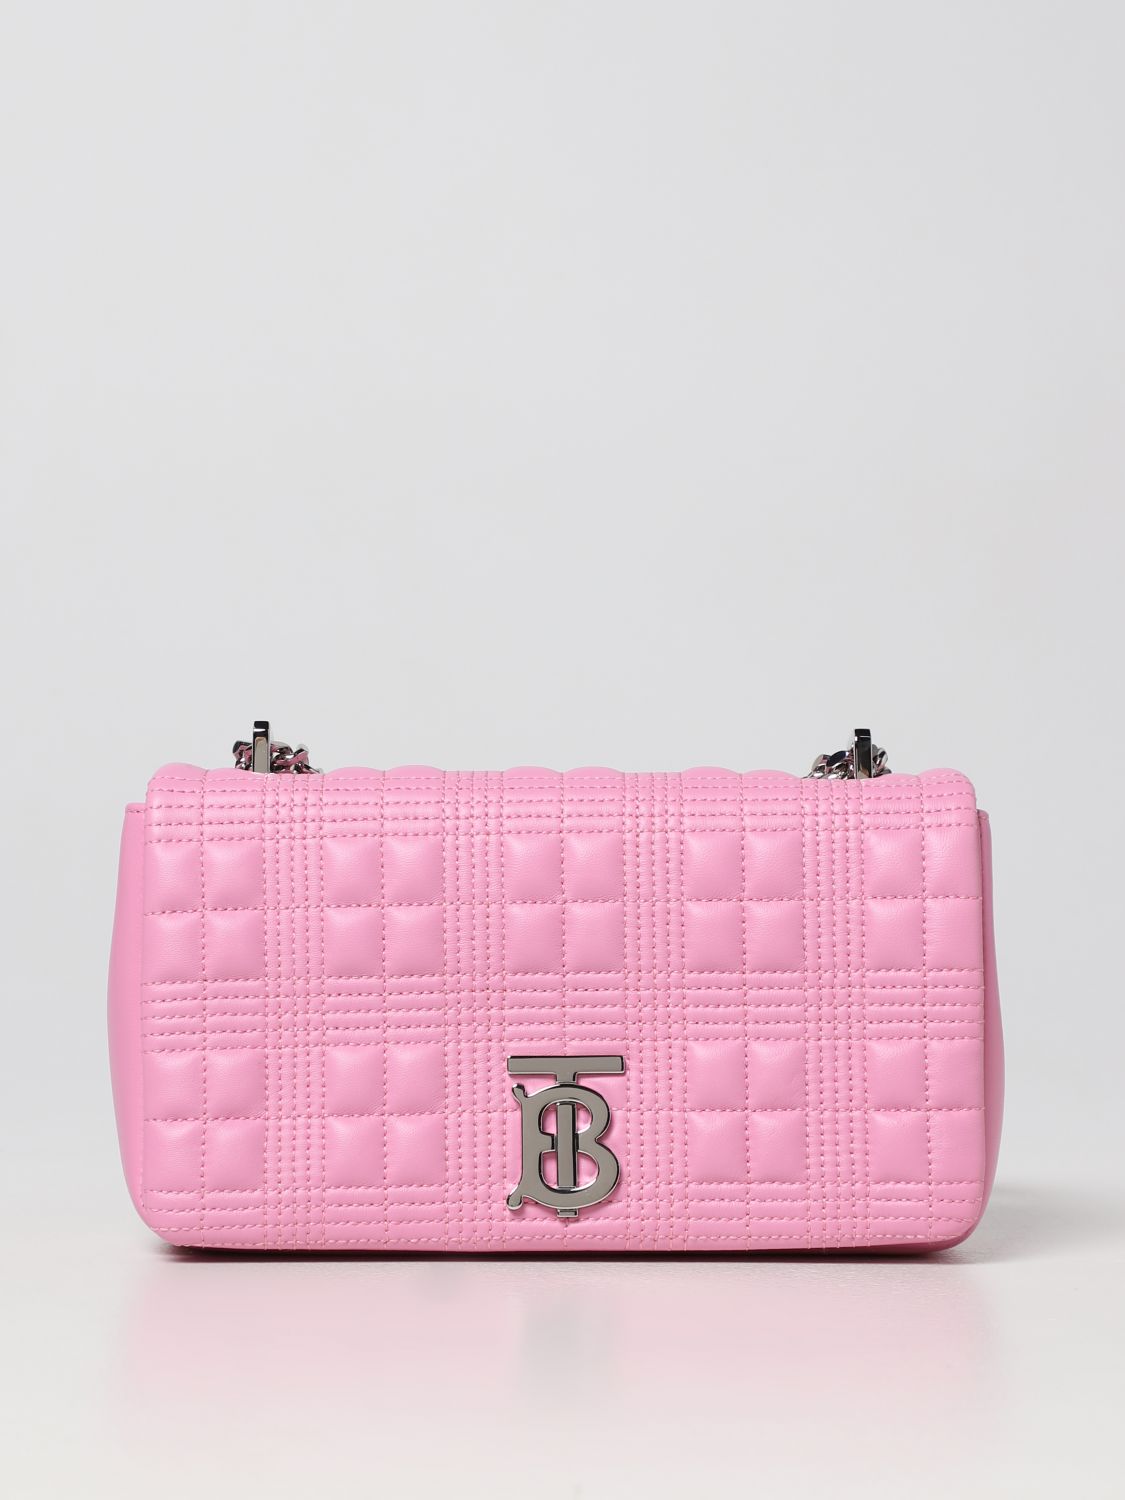 BURBERRY: Lola bag in quilted leather - Pink  Burberry mini bag 8066180  online at